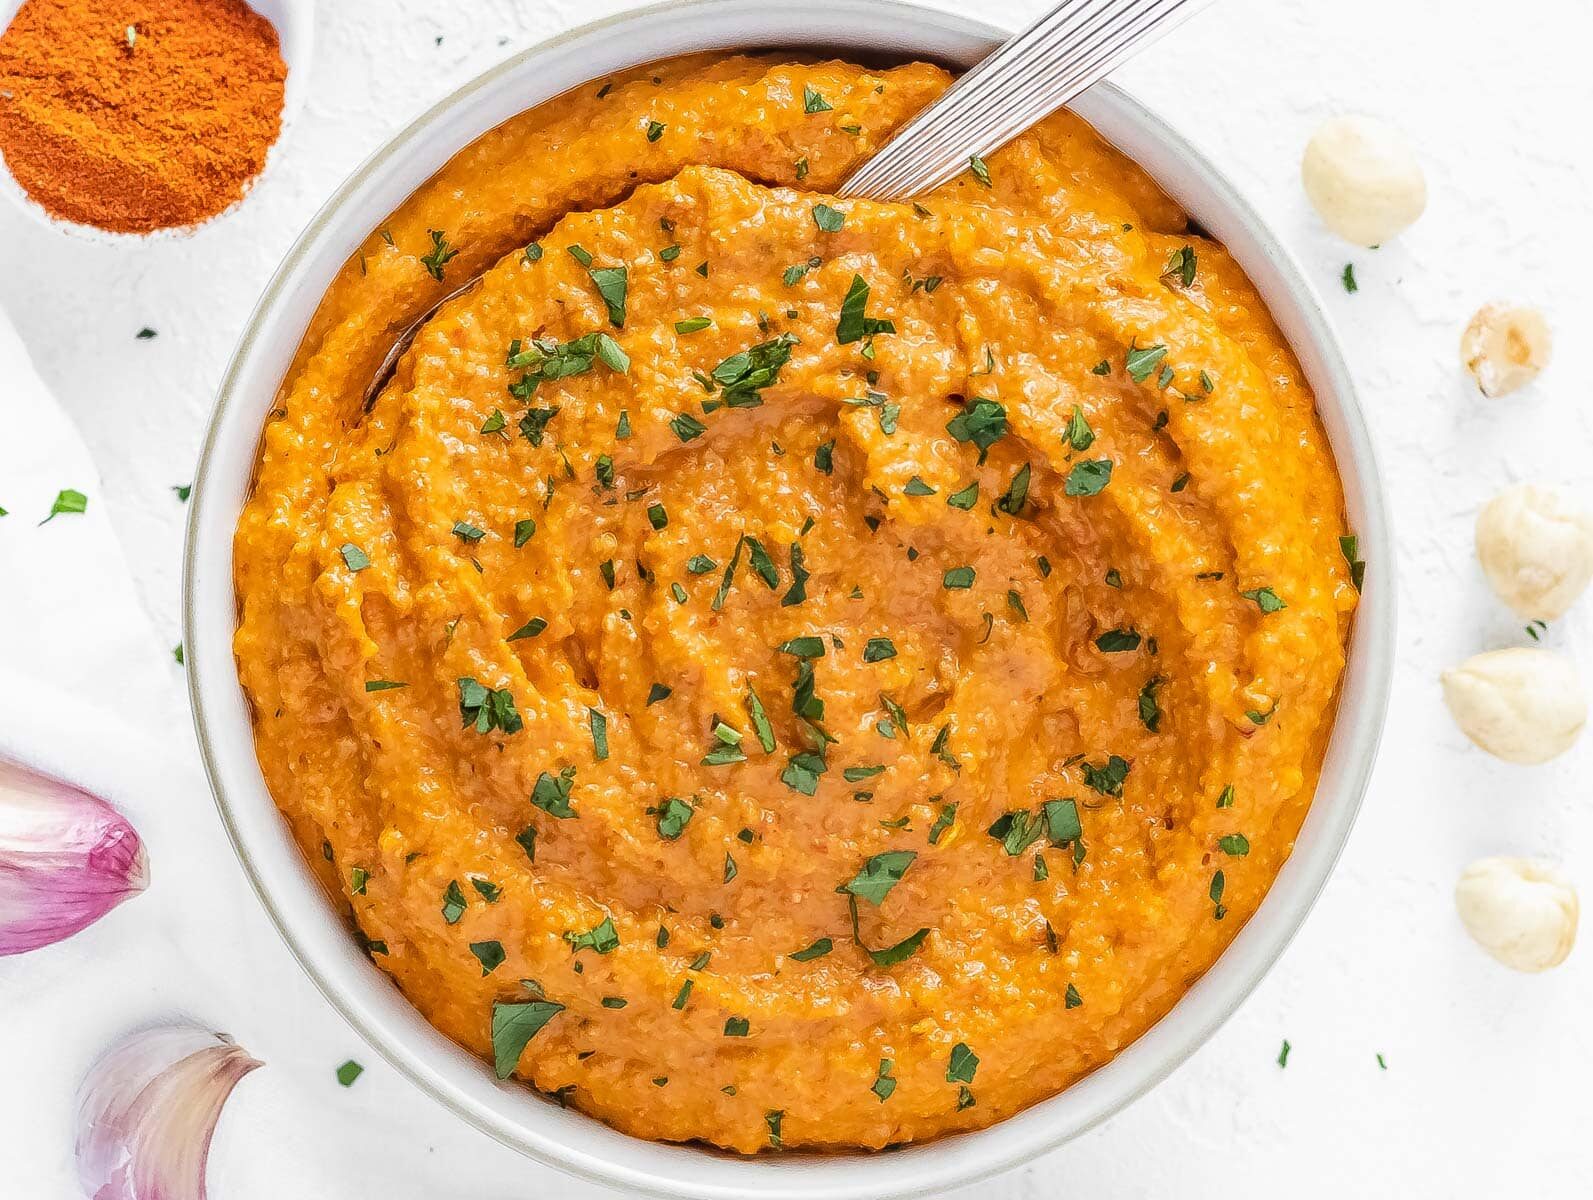 romesco sauce with parsley on top